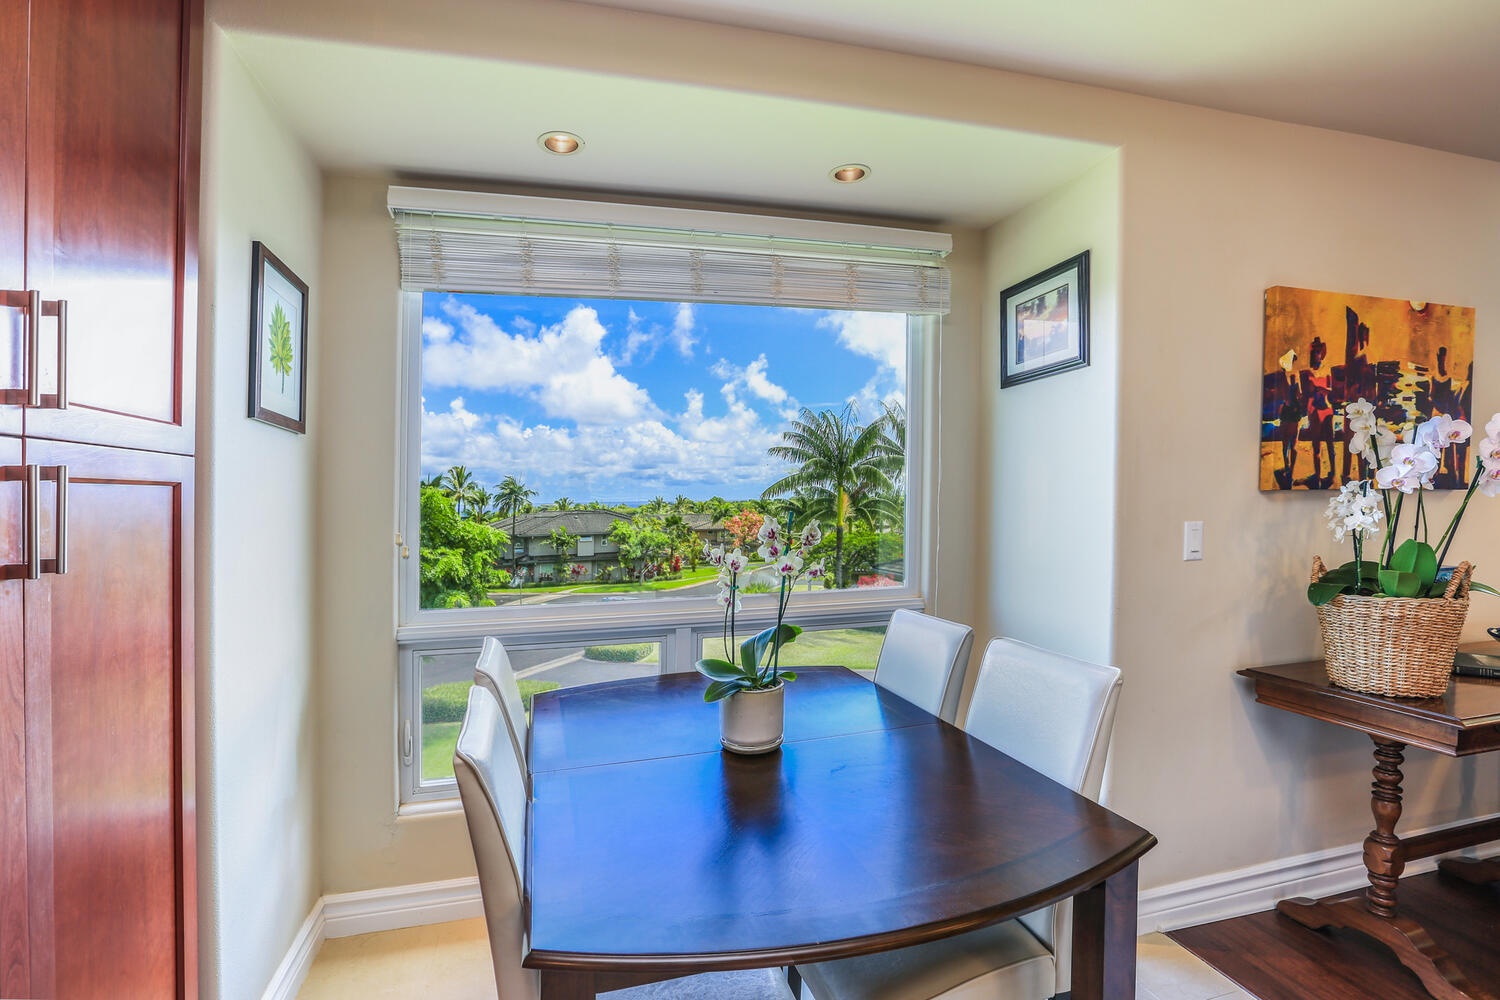 Princeville Vacation Rentals, Noelani Kai - Elegant dining space for savoring delightful meals with a view in a four seater dining table